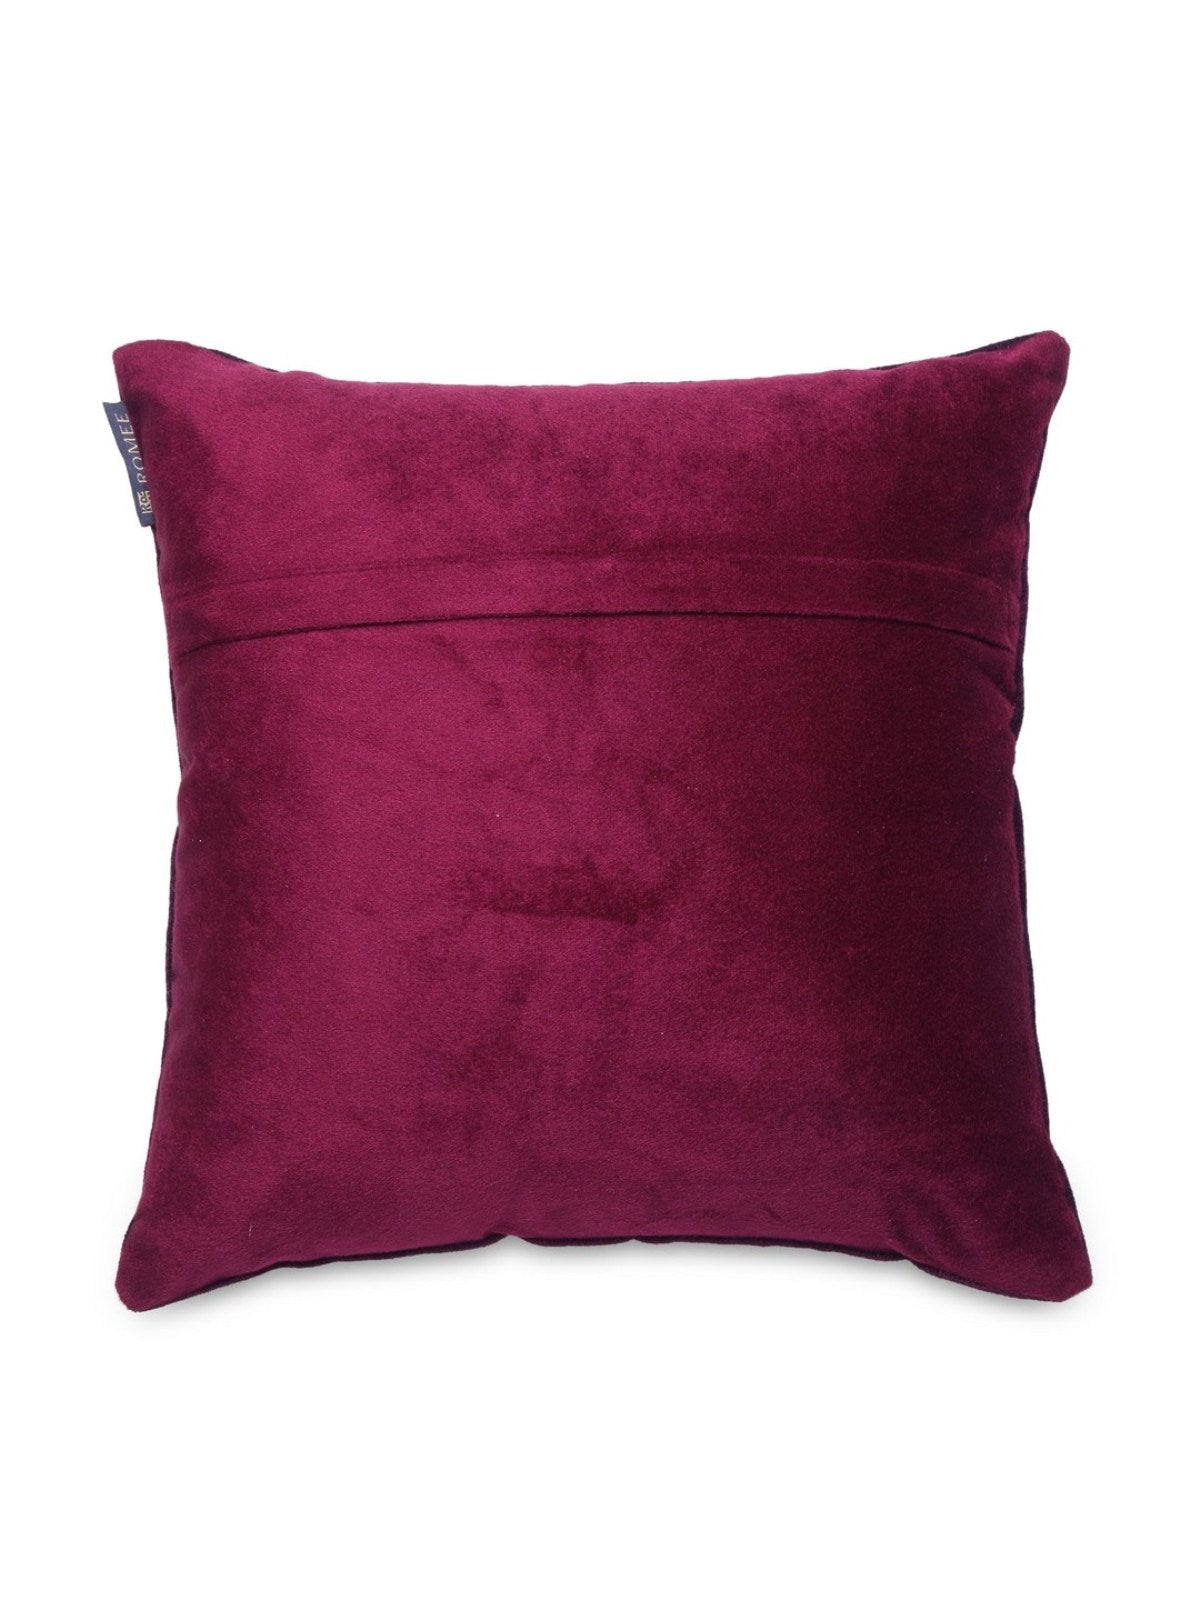 Peacock Feather Cut Designer Velvet Cushion Covers 16 inch x 16 inch, Set of 5 - Purple